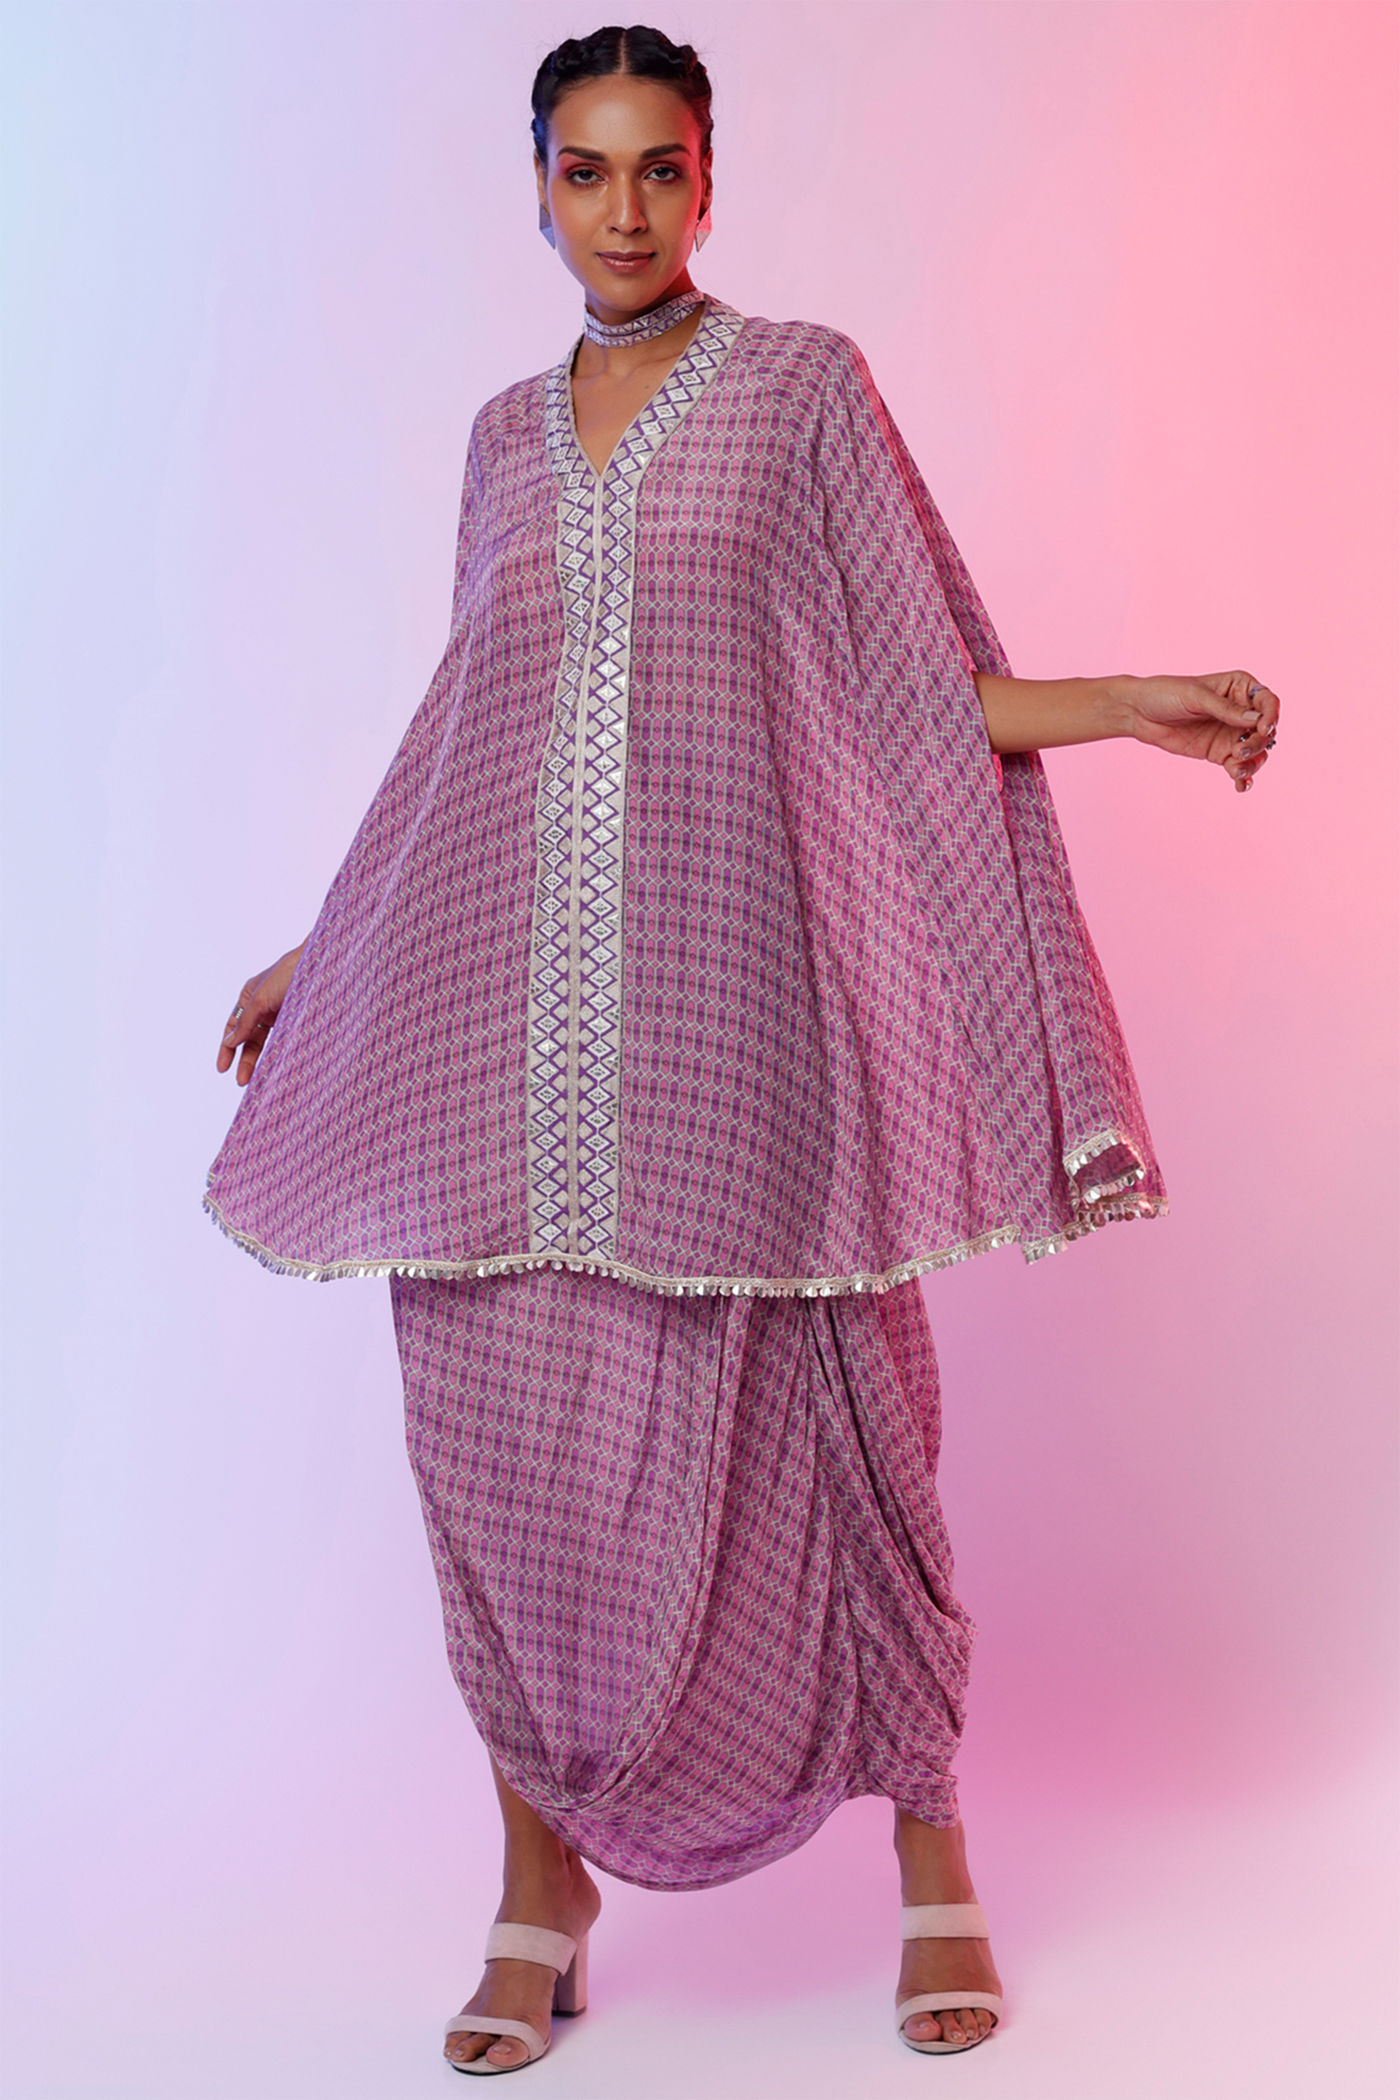 sva by sonam and paras modi   Lilac And Lattice Print Drape Skirt With Printed Cape Top Festive fusion Indian designer wear online shopping melange singapore indian designer wear